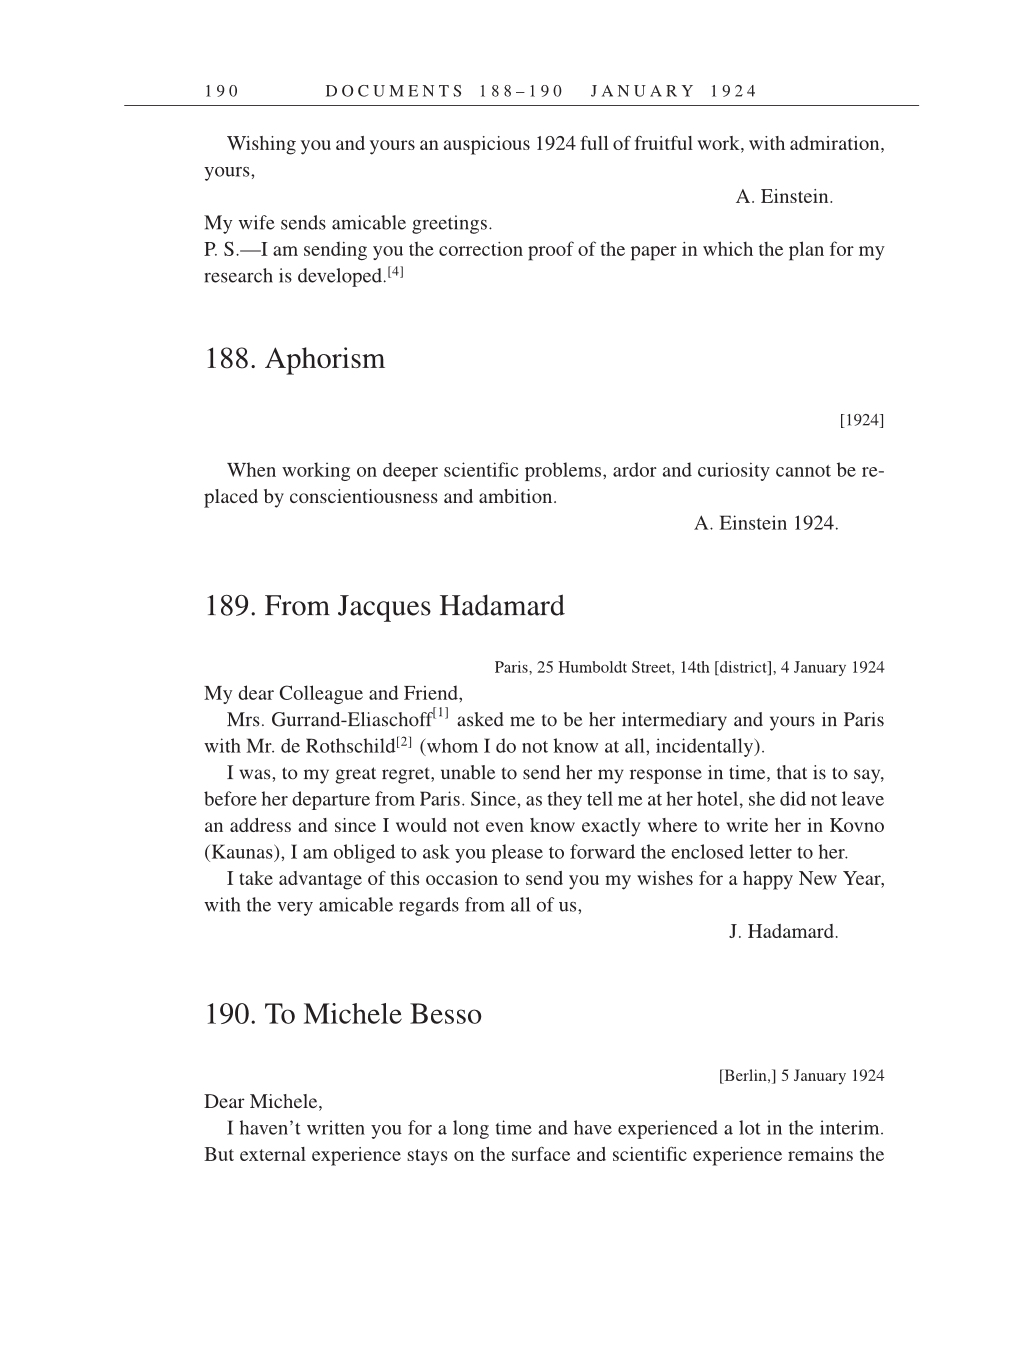 Volume 14: The Berlin Years: Writings & Correspondence, April 1923-May 1925 (English Translation Supplement) page 190